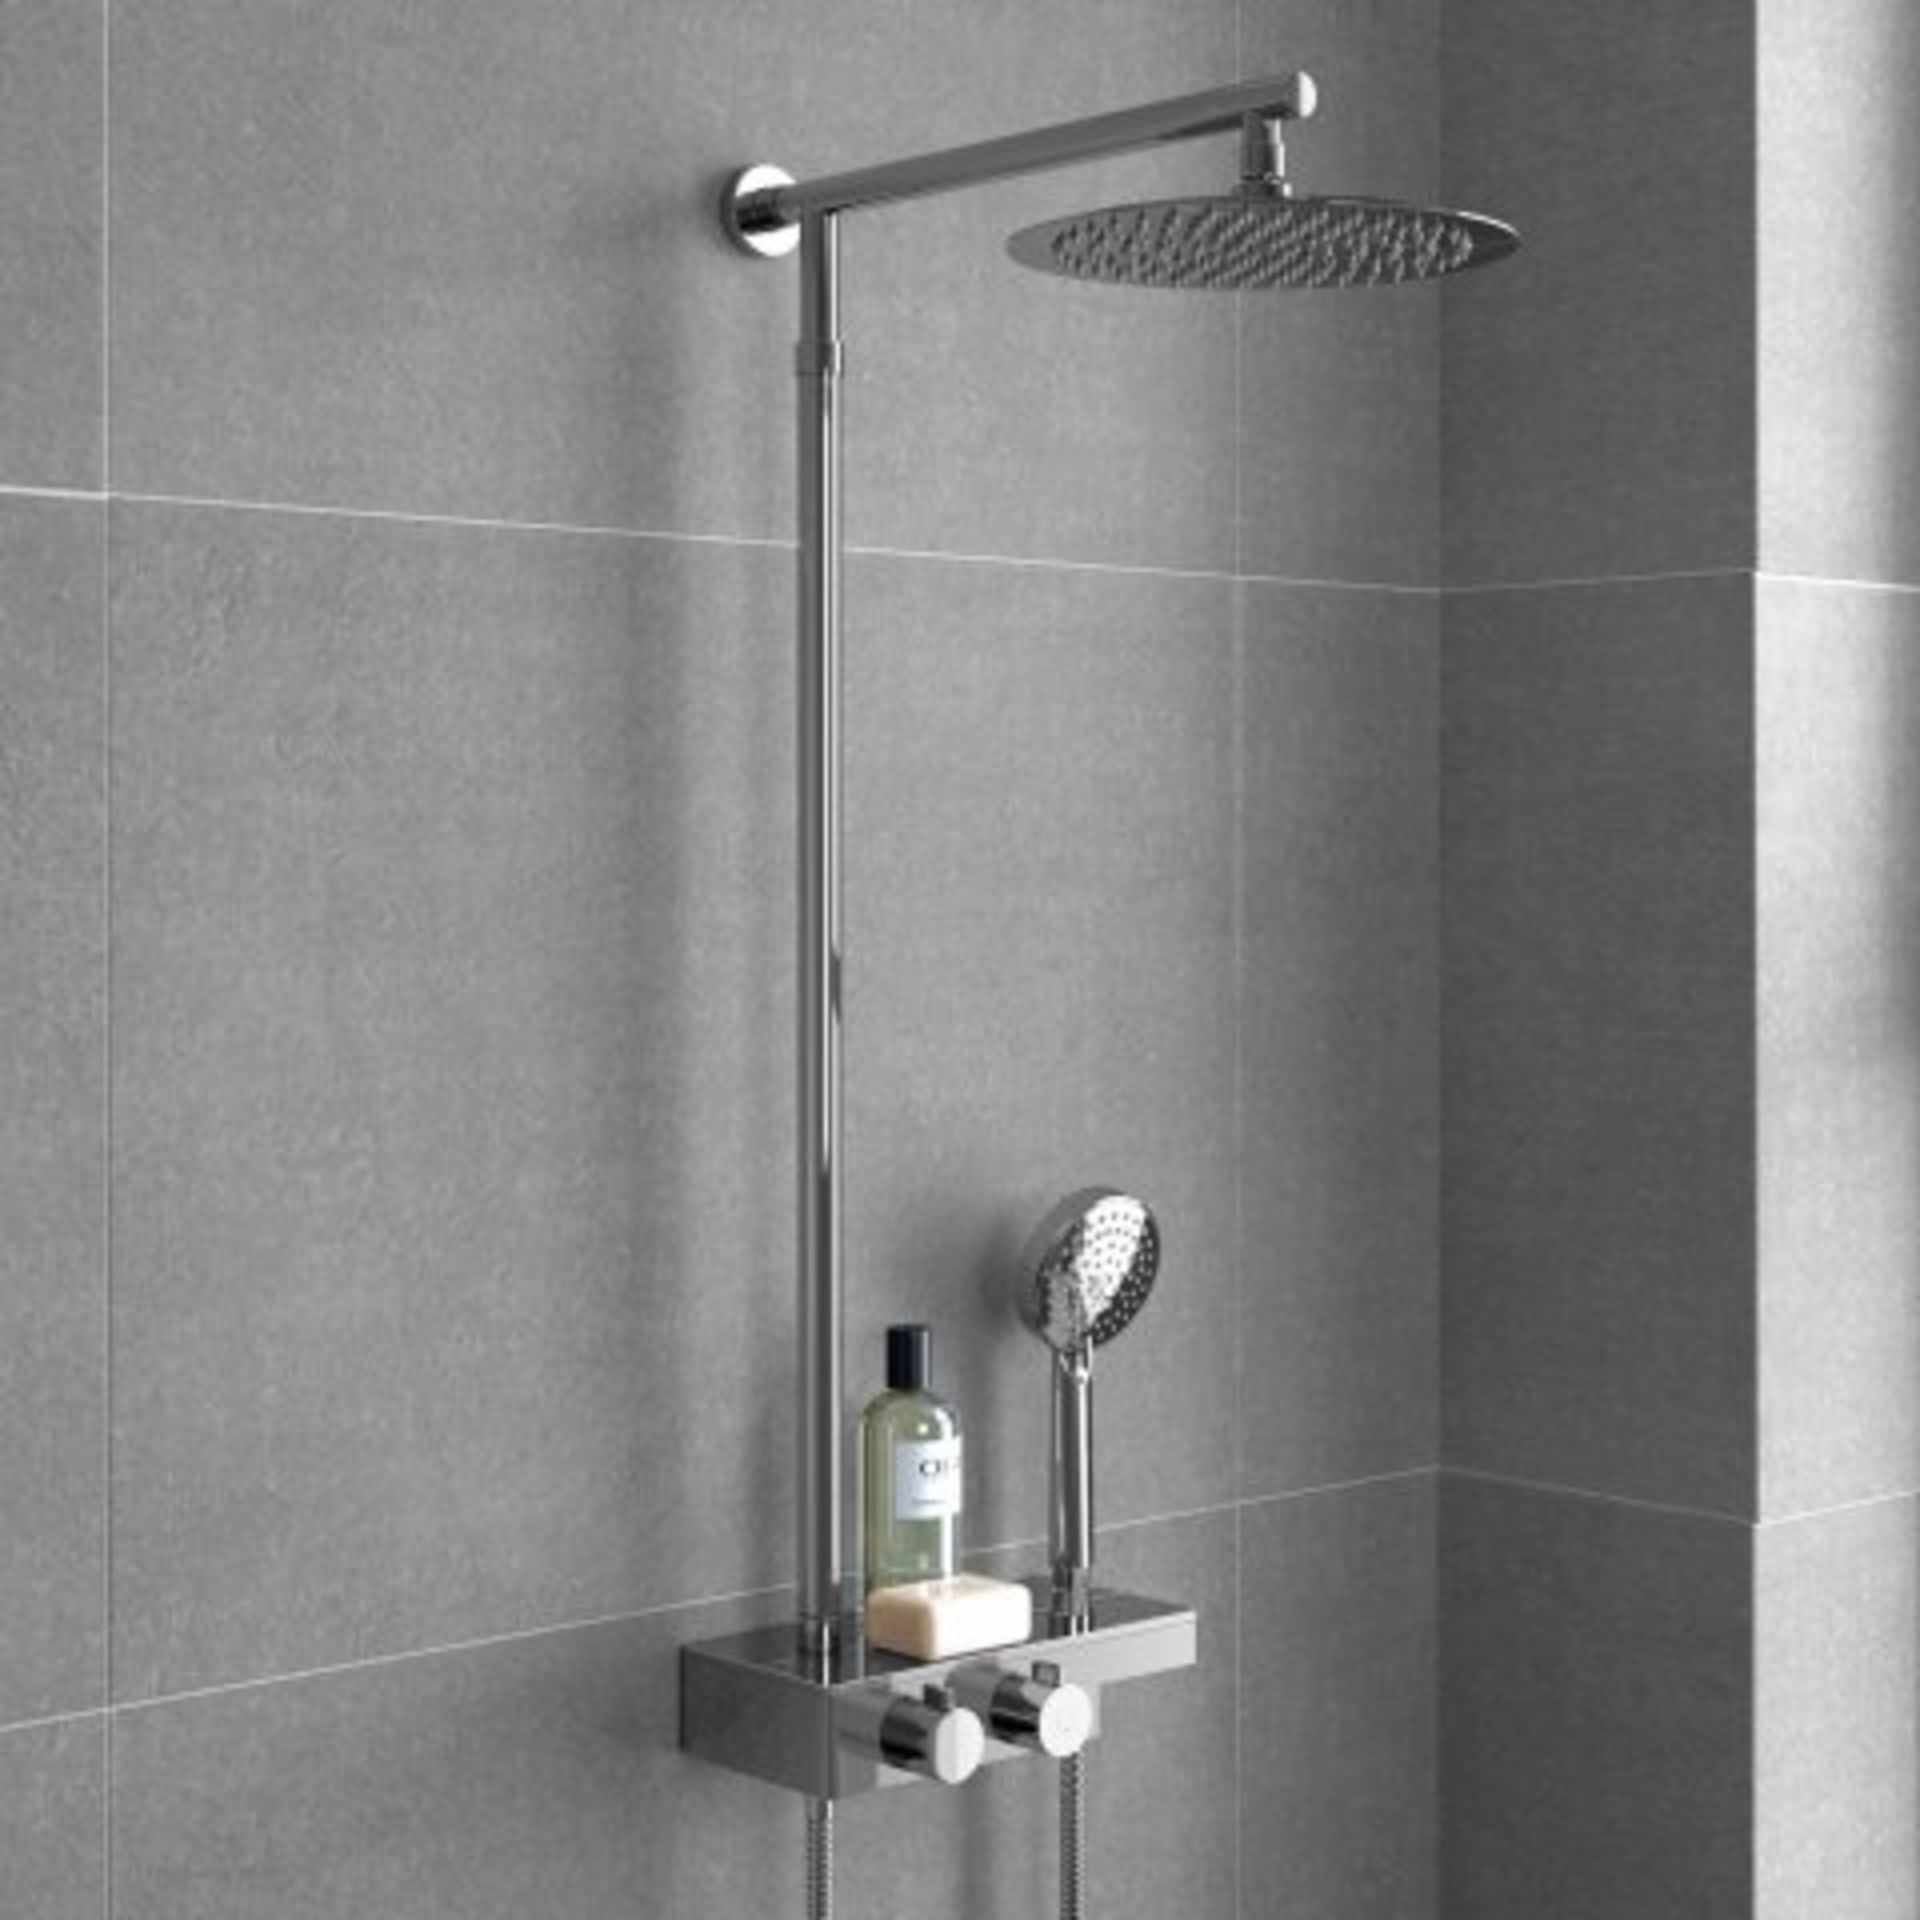 (I54) Round Exposed Thermostatic Mixer Shower Kit & Large Shower Head RRP £349.99 Designer Style Our - Image 2 of 6